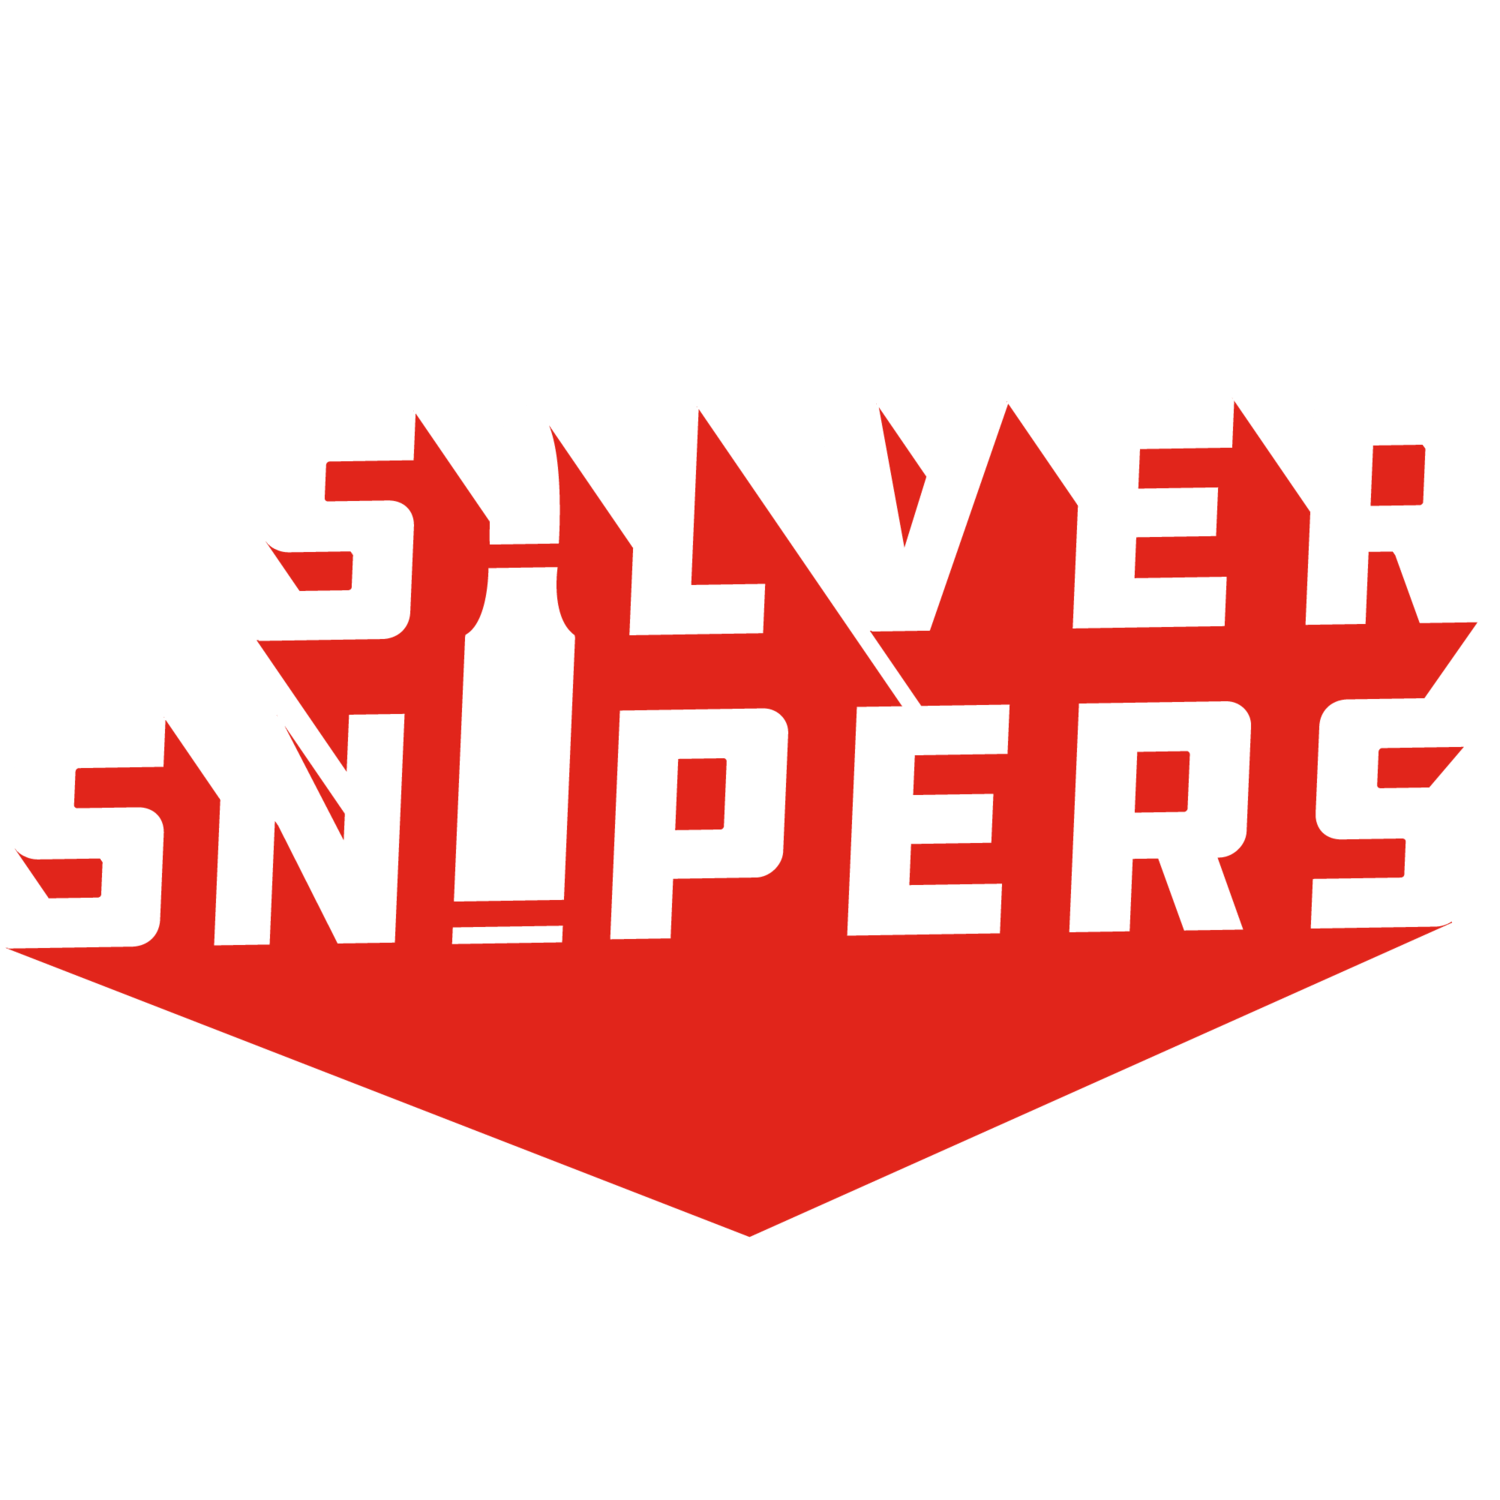 Just Sniping Logo - Lenovo — Silver Snipers